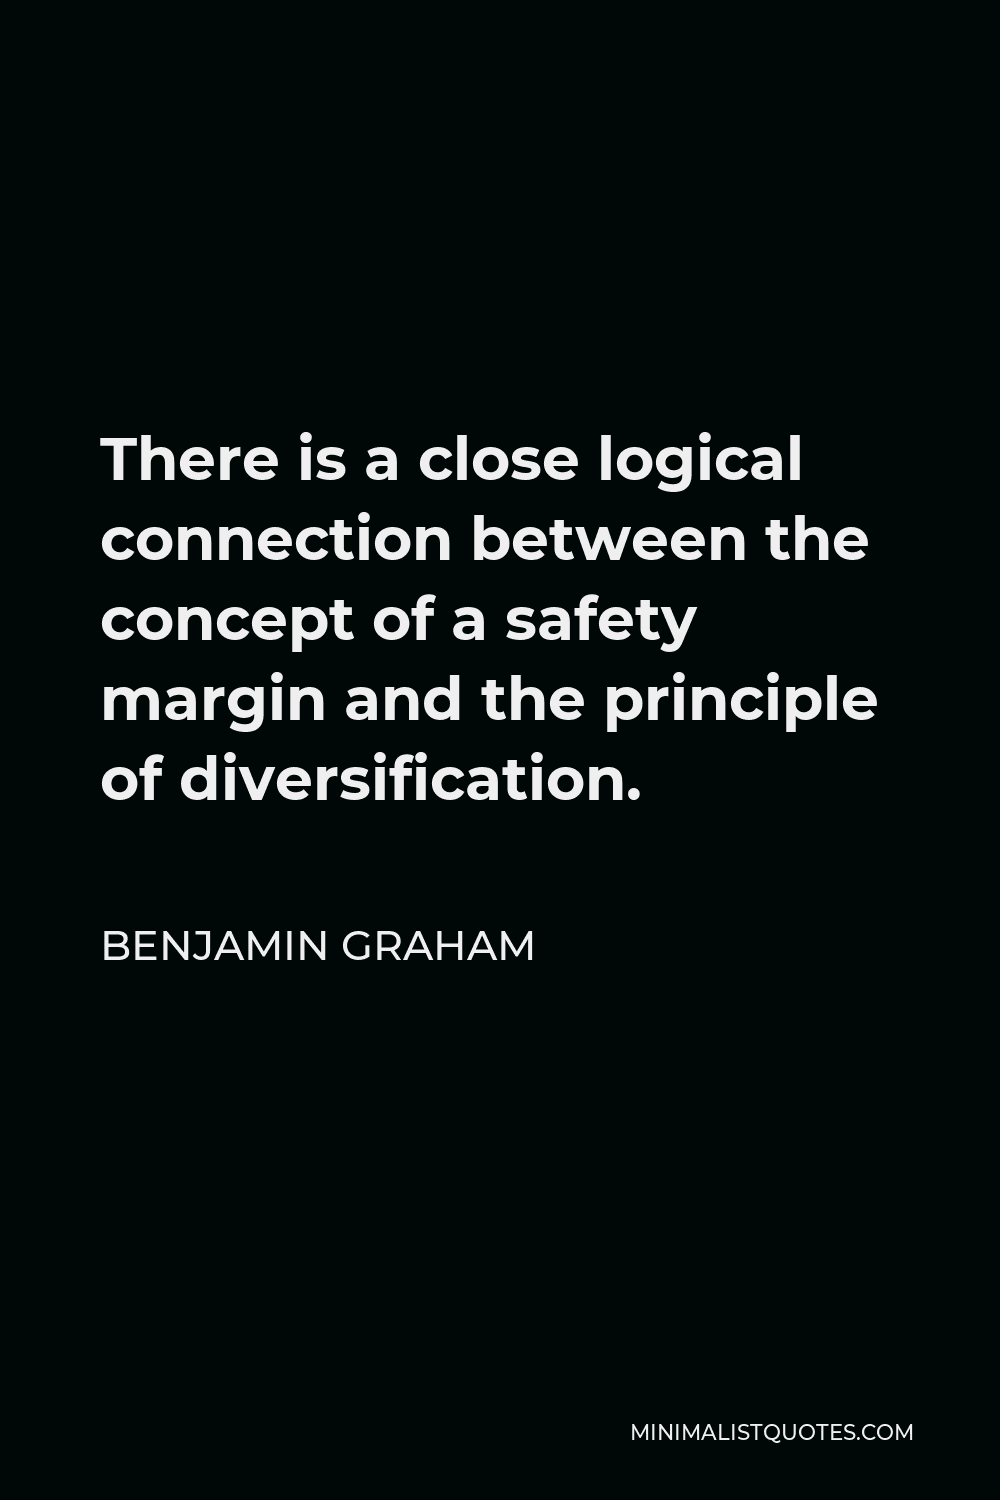 Benjamin Graham Quote - There is a close logical connection between the concept of a safety margin and the principle of diversification.